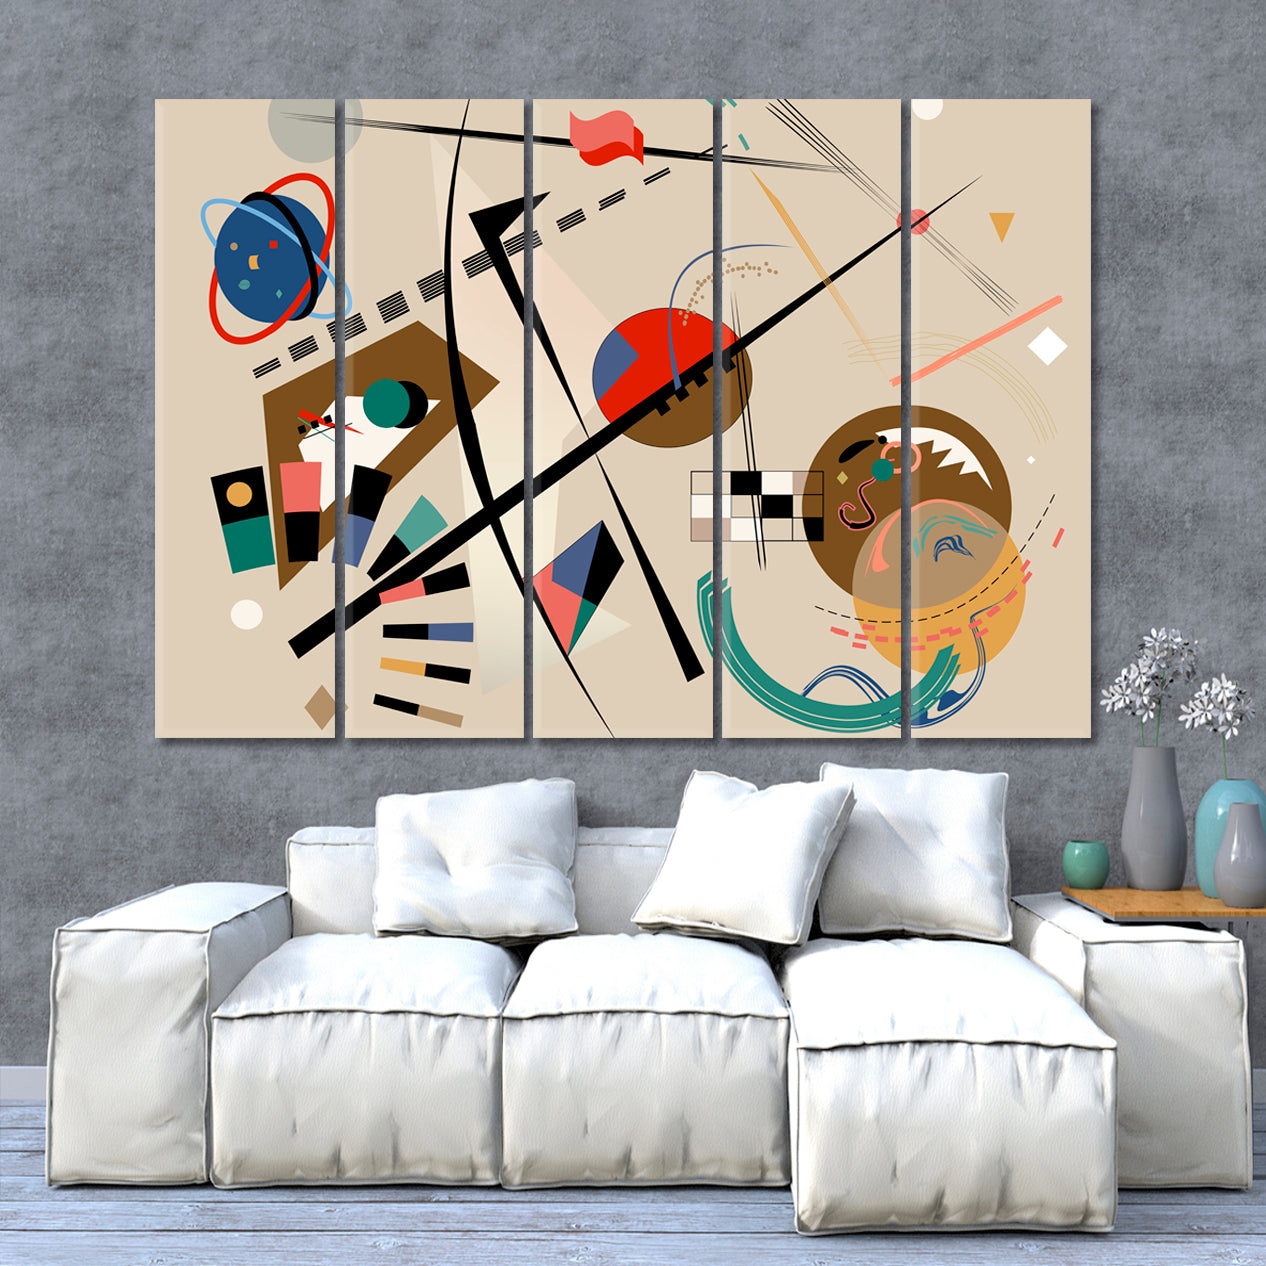 Geometric Curved Shapes Expressionism Abstract Style Contemporary Art Artesty 5 panels 36" x 24" 